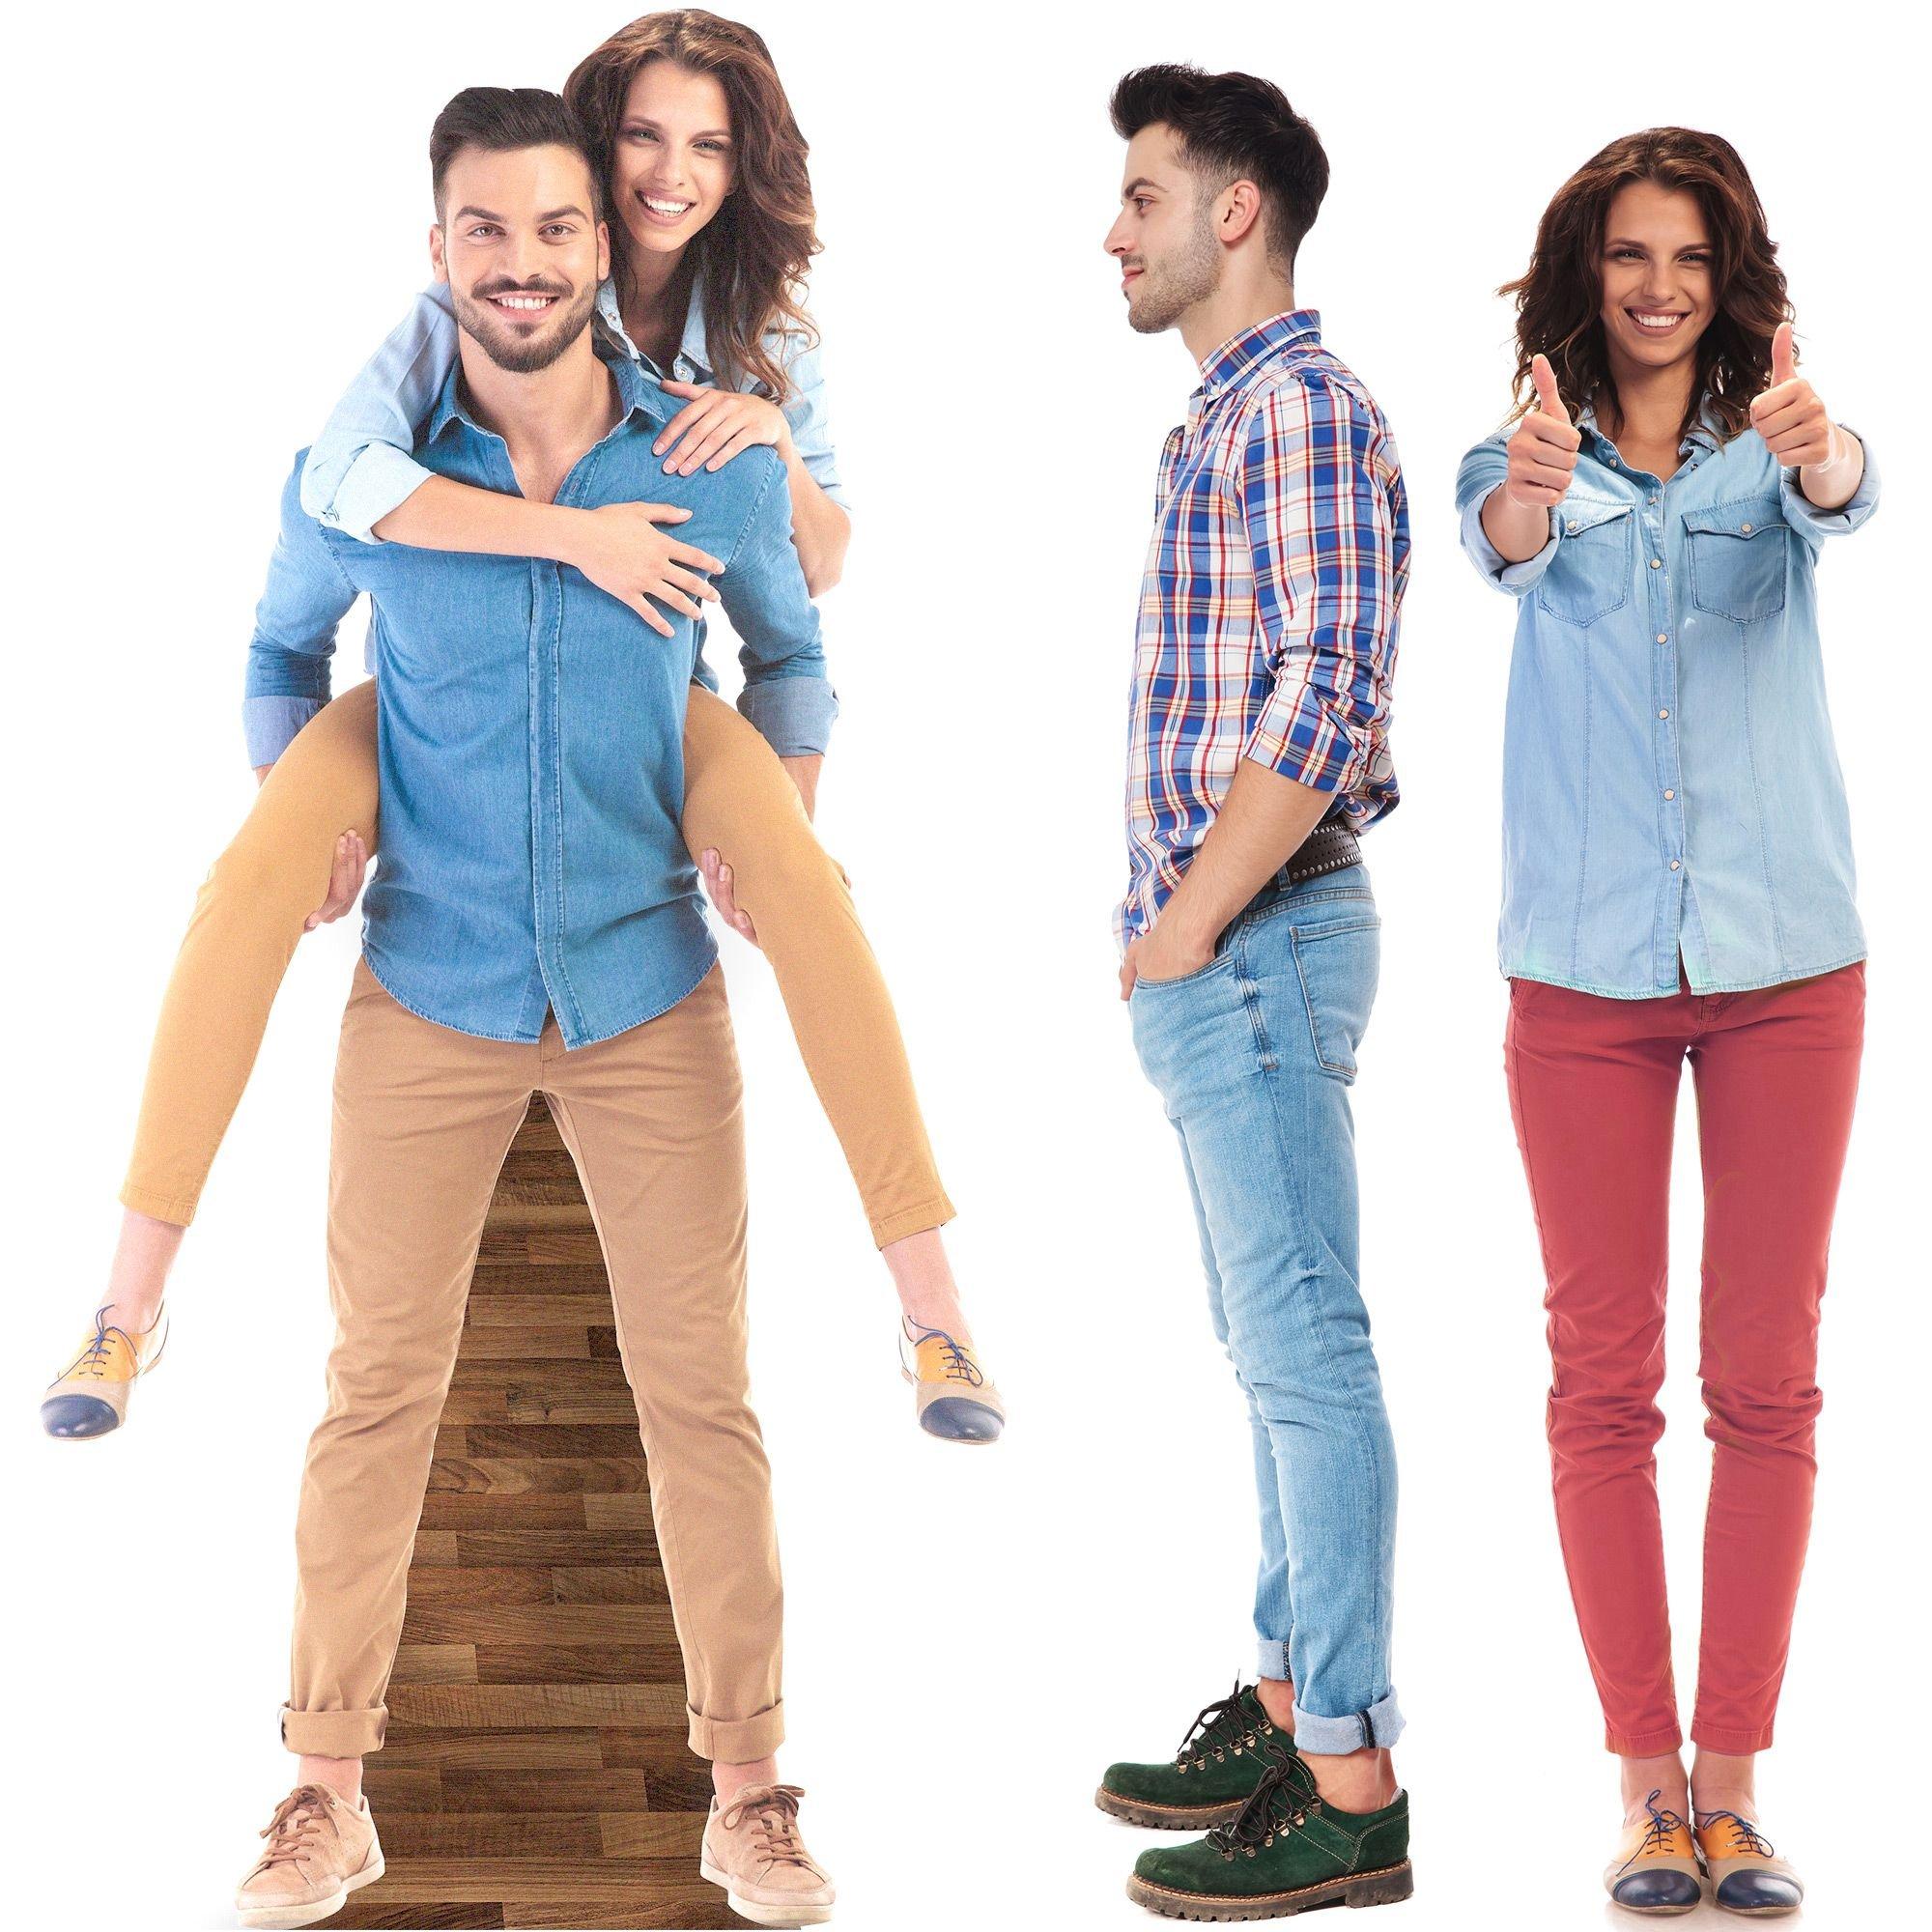 OEM Lifesize Cardboard Cutout Standee Stand up Poster Man Shelves